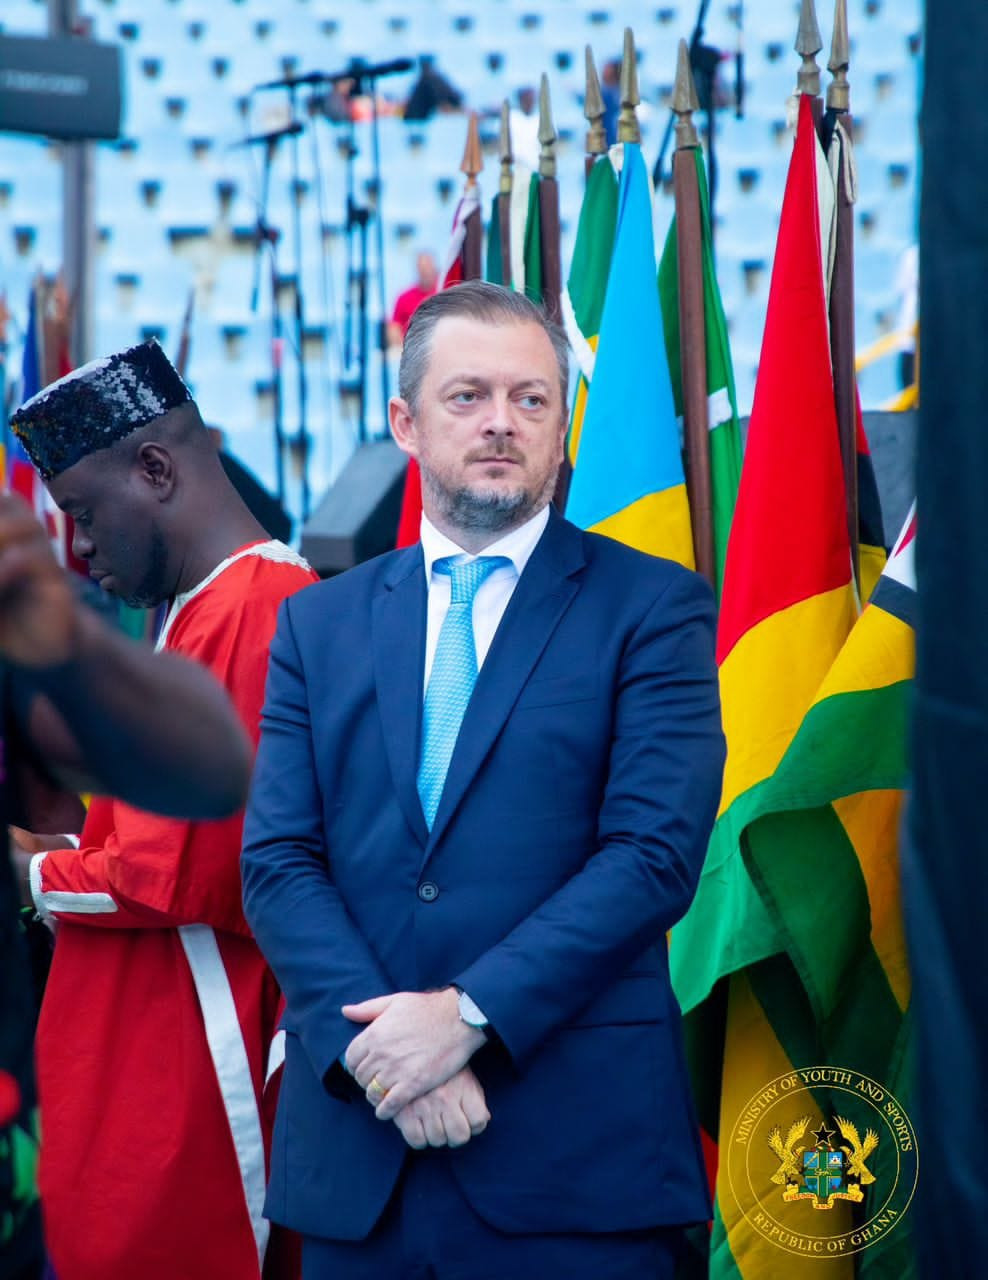 International Paralympic Committee President Andrew Parsons was among the spectators for the Opening Ceremony at the inaugural African Para Games ©Ghana Ministry of Youth and Sports